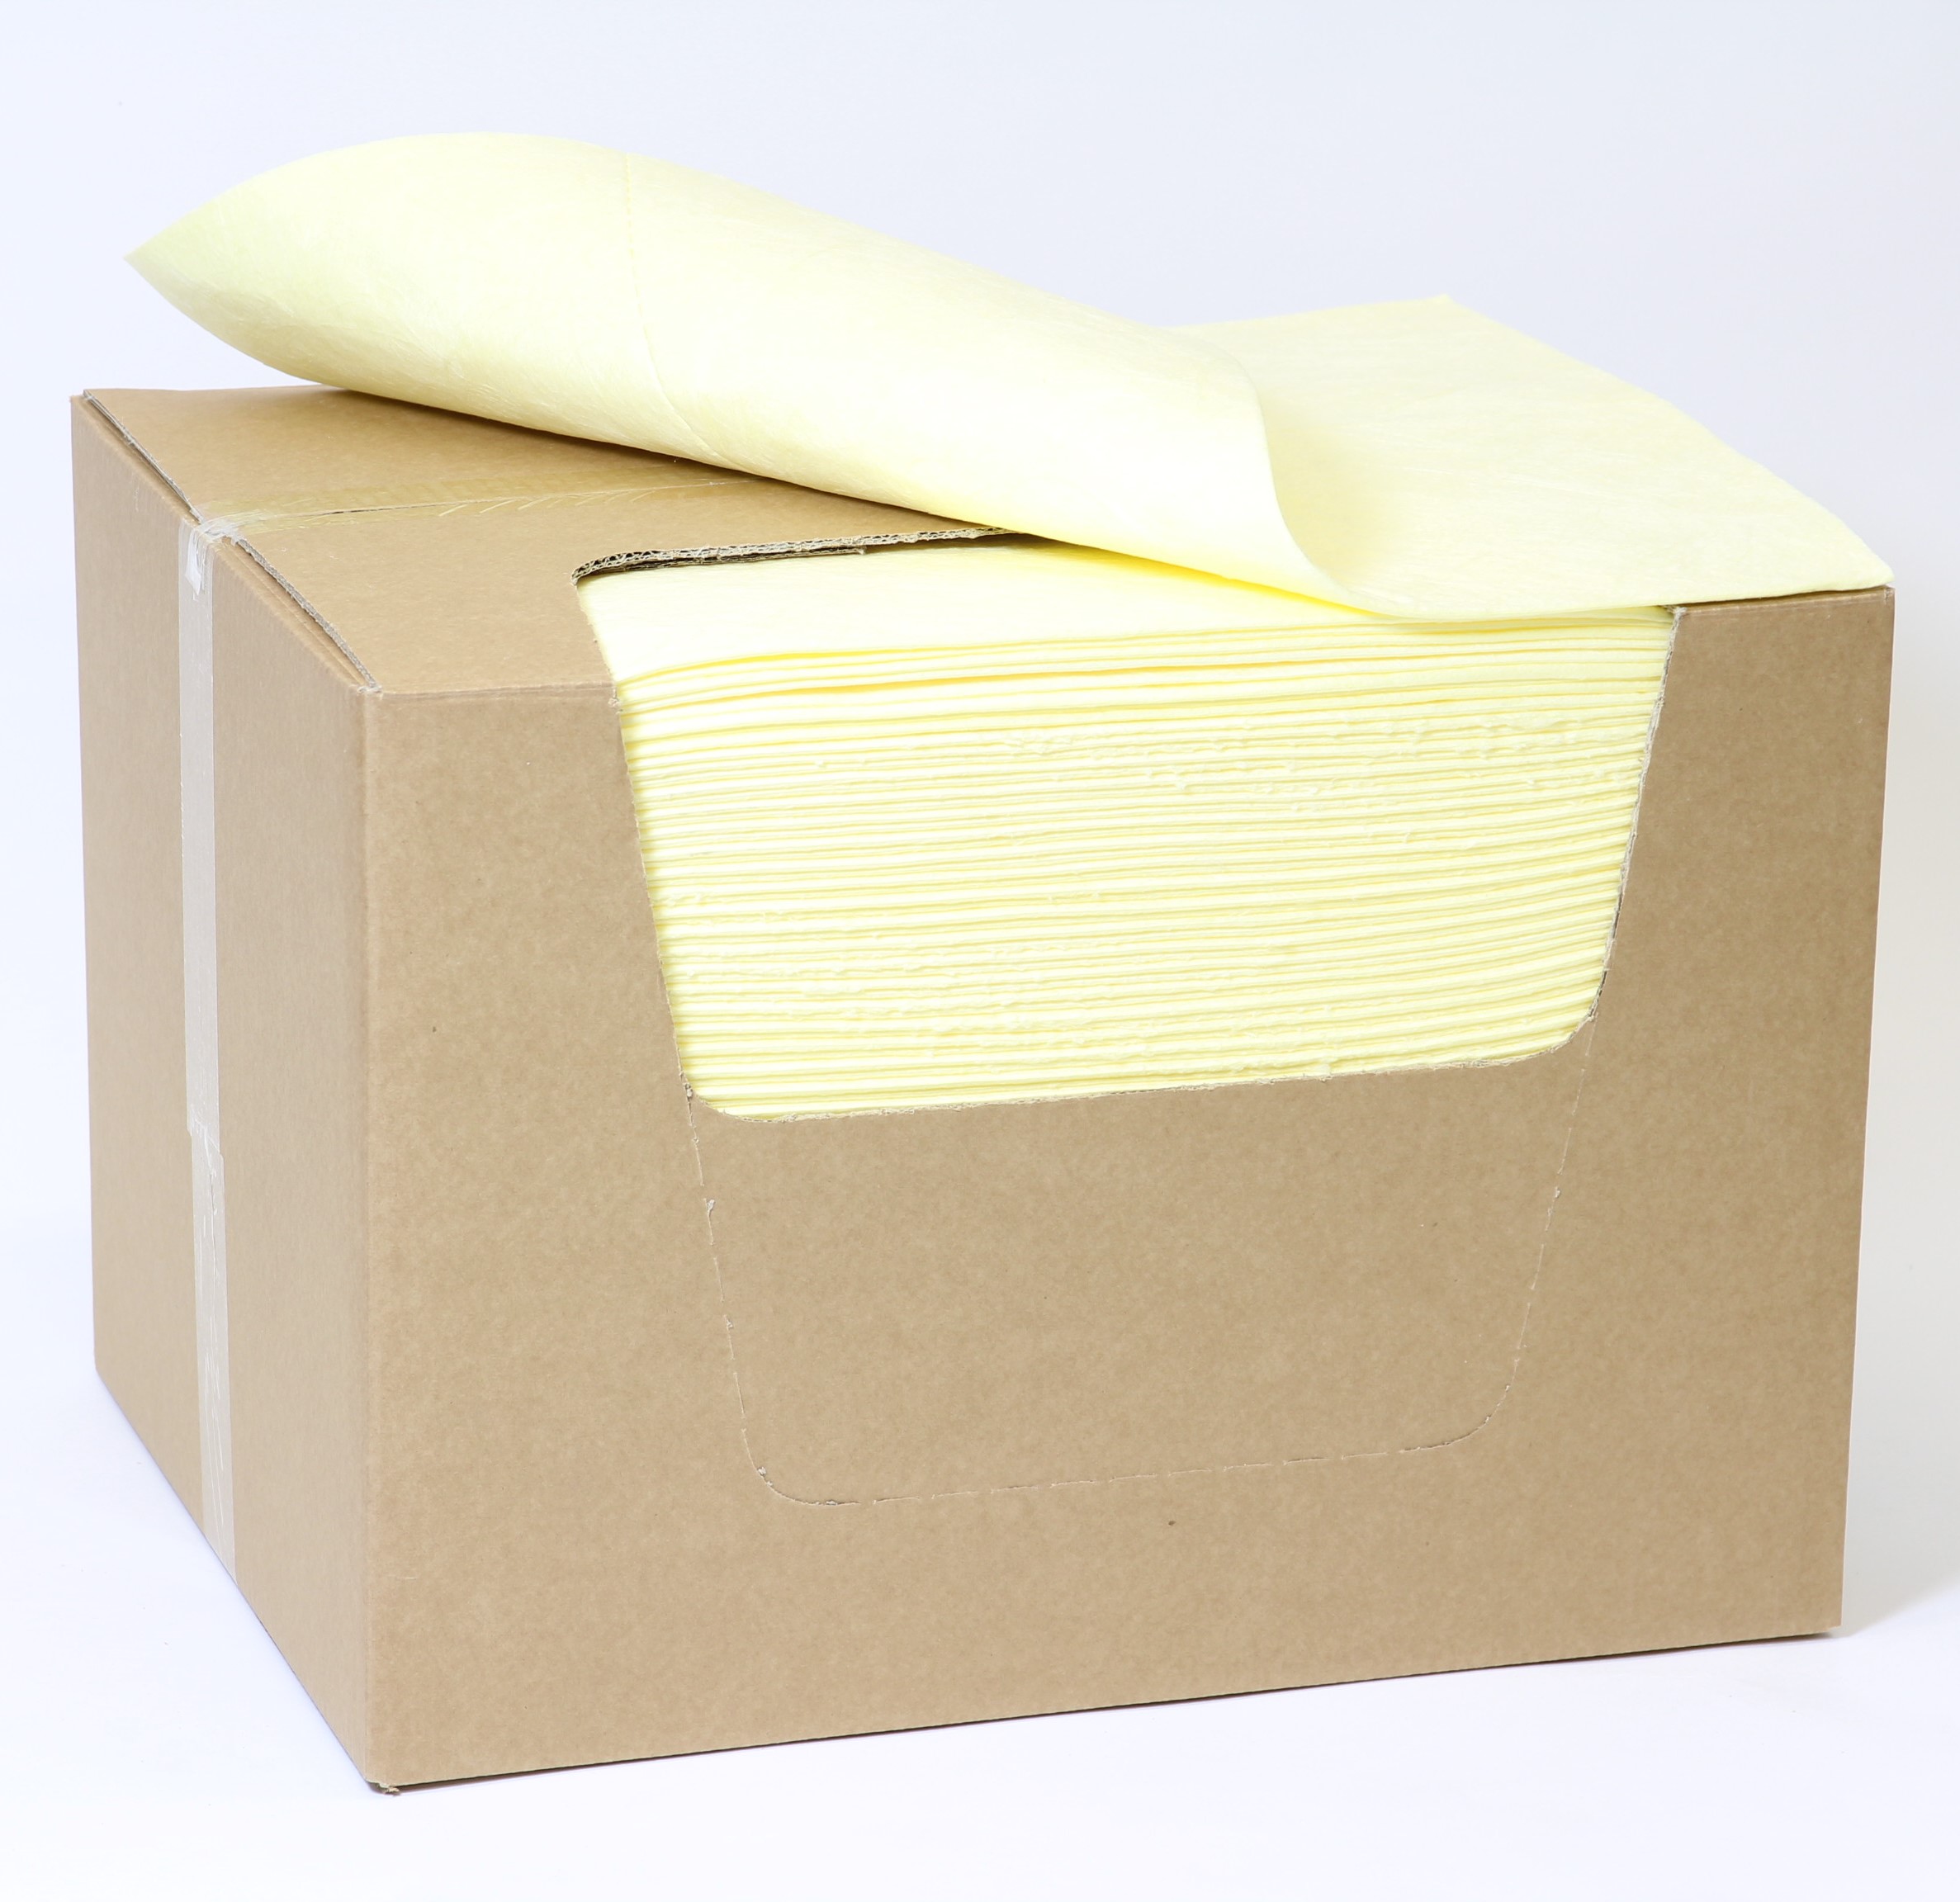 ICOSORB&#174; FIRST LIGHT yellow in box